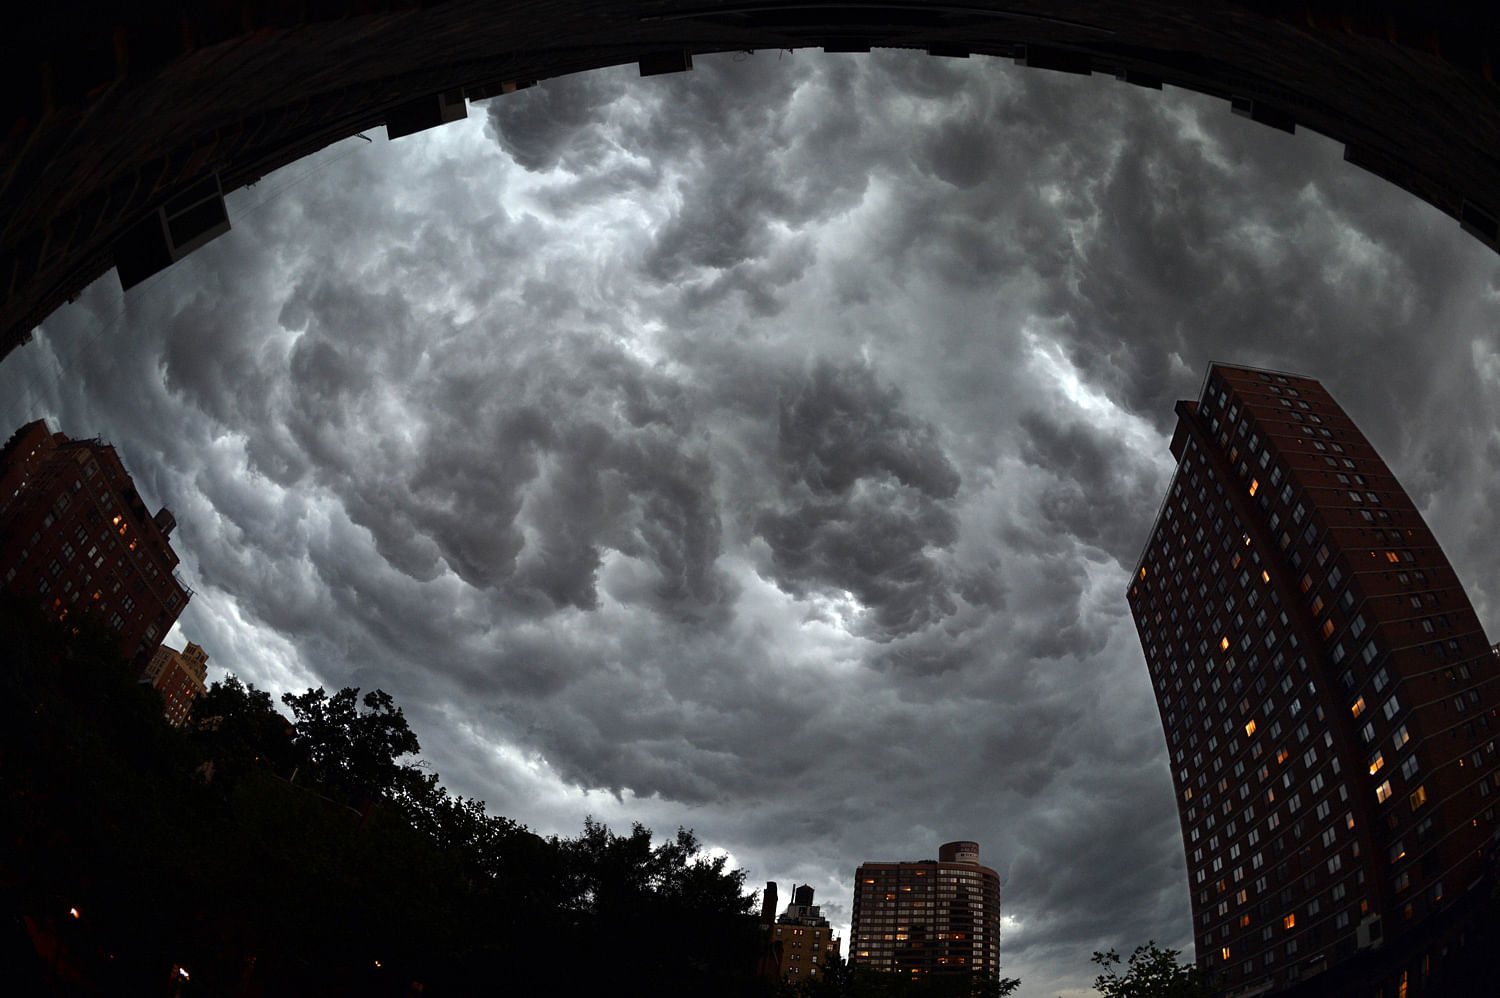 Clouds gather over apartment buildings ahead of a thunderstorm on the east side of Manhattan July 26, 2012 in New York. AFP